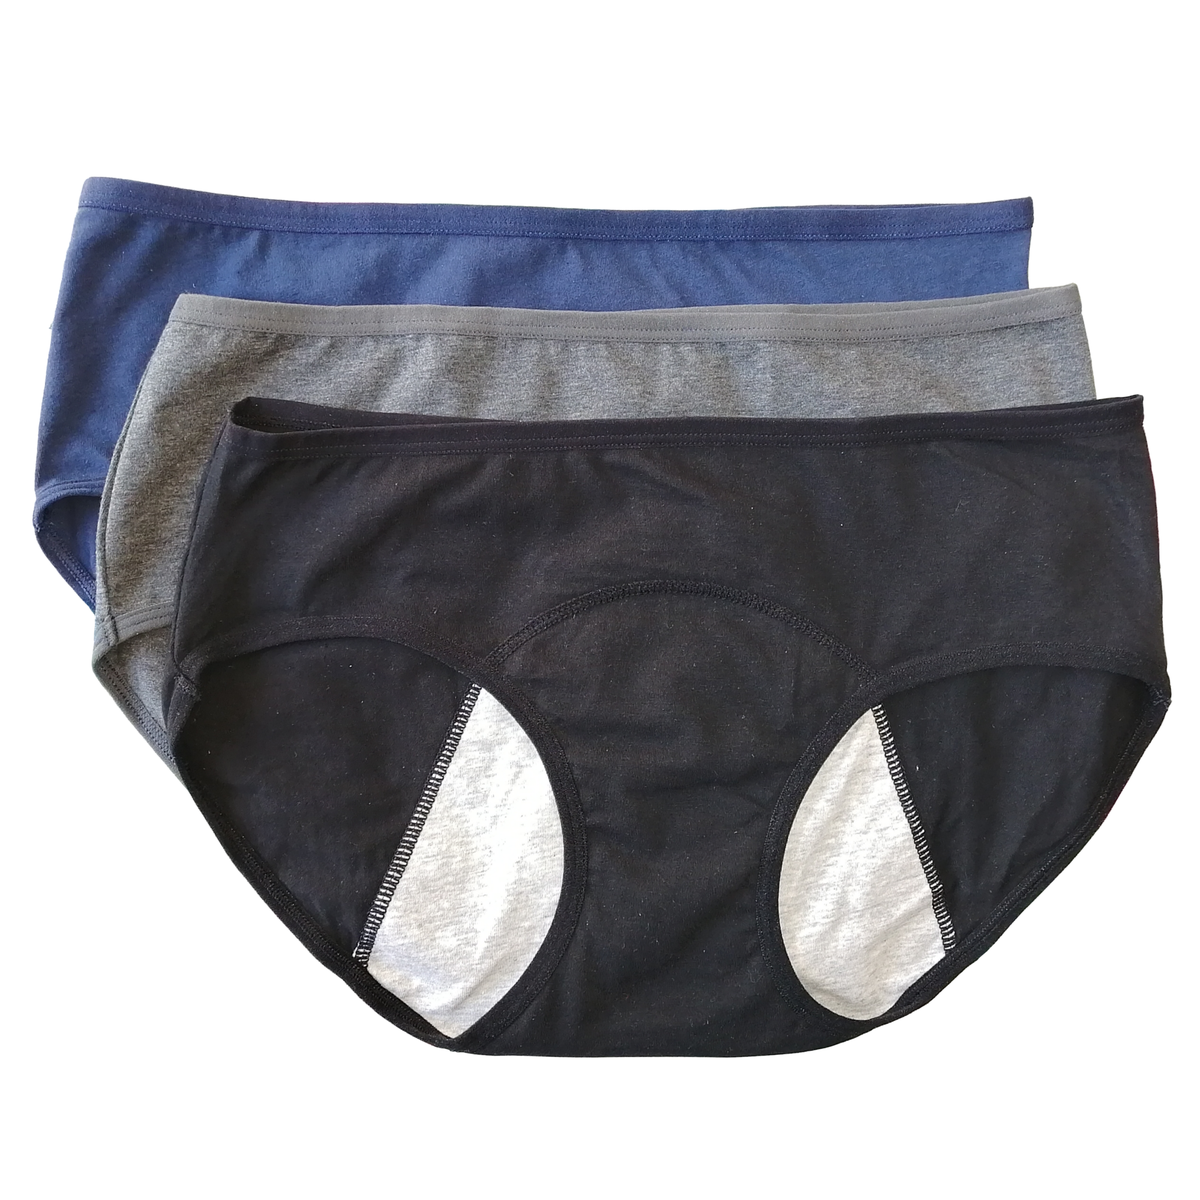 3 x NOOI Liner Period Panties Non-Absorbent and Leakproof